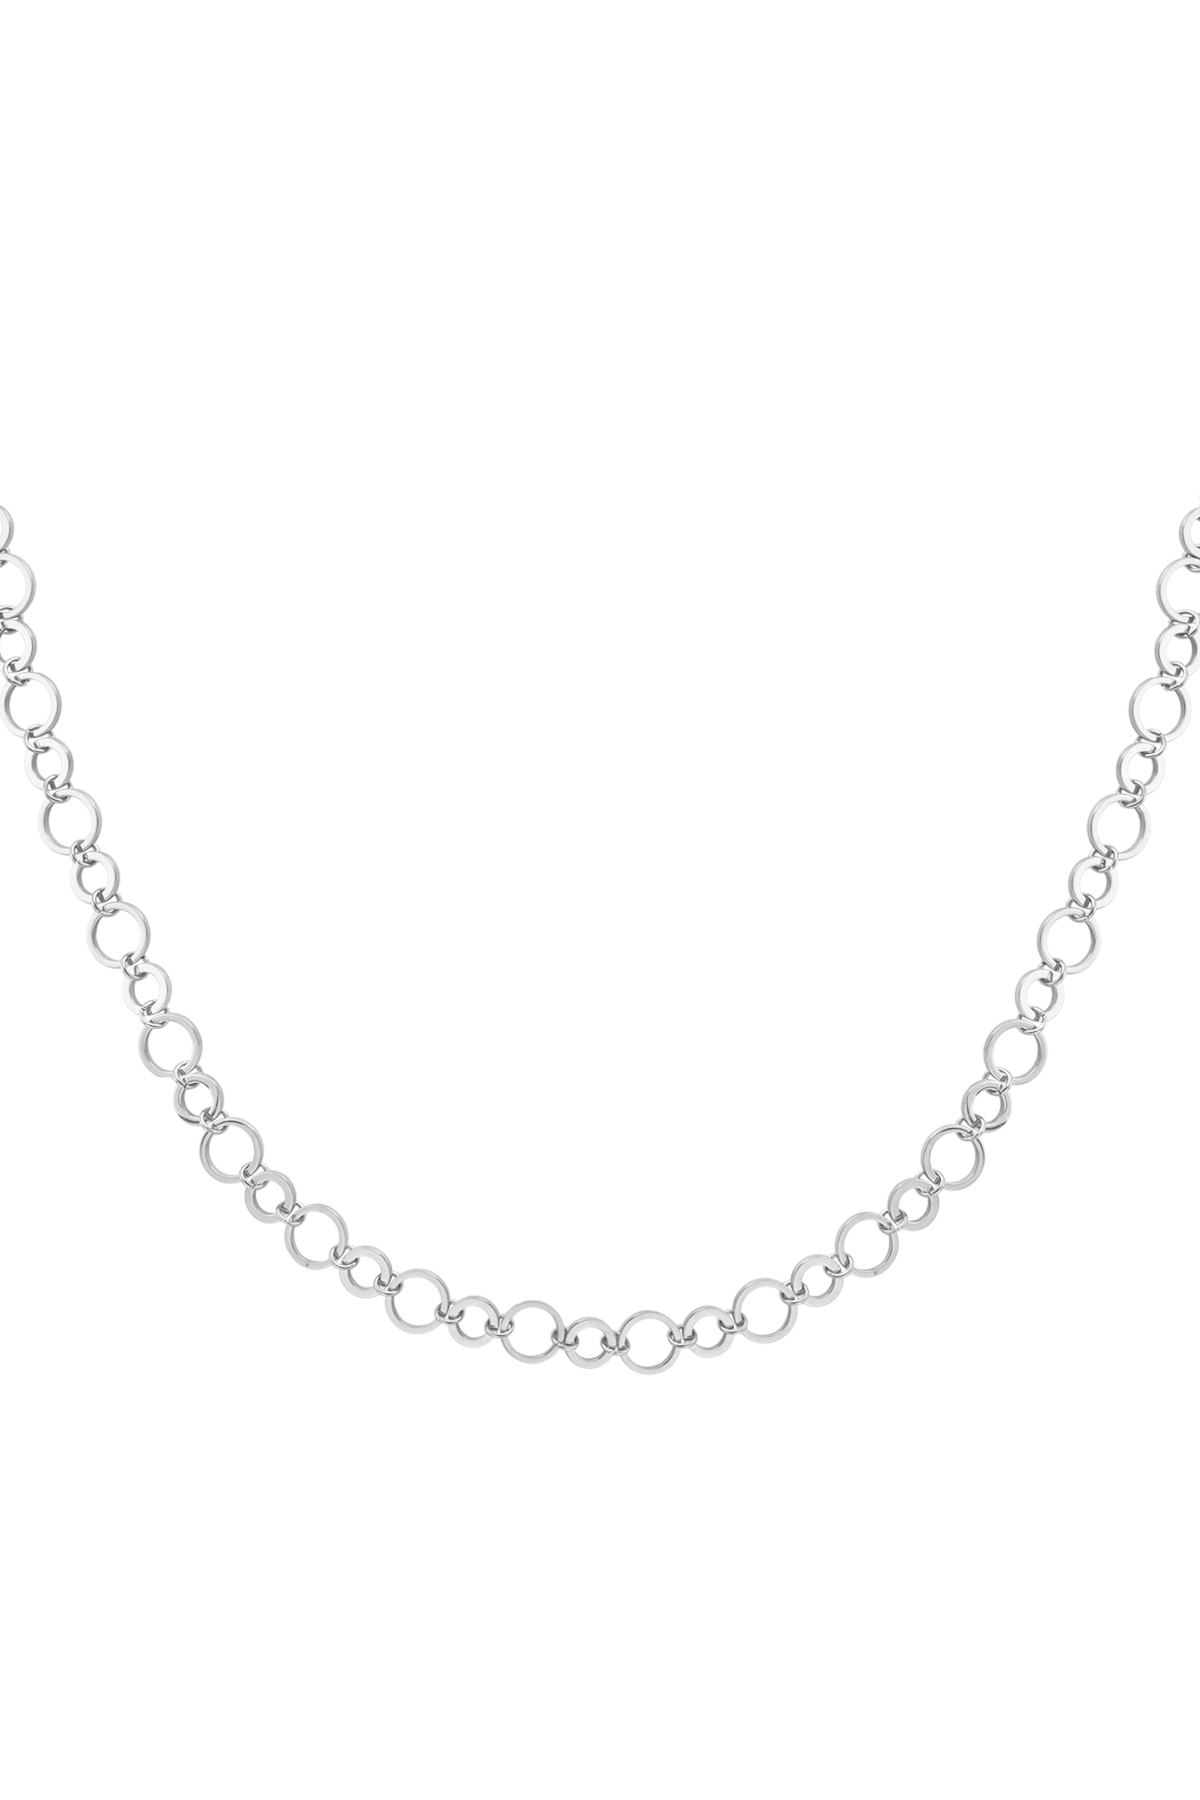 Necklace small and large round links - silver